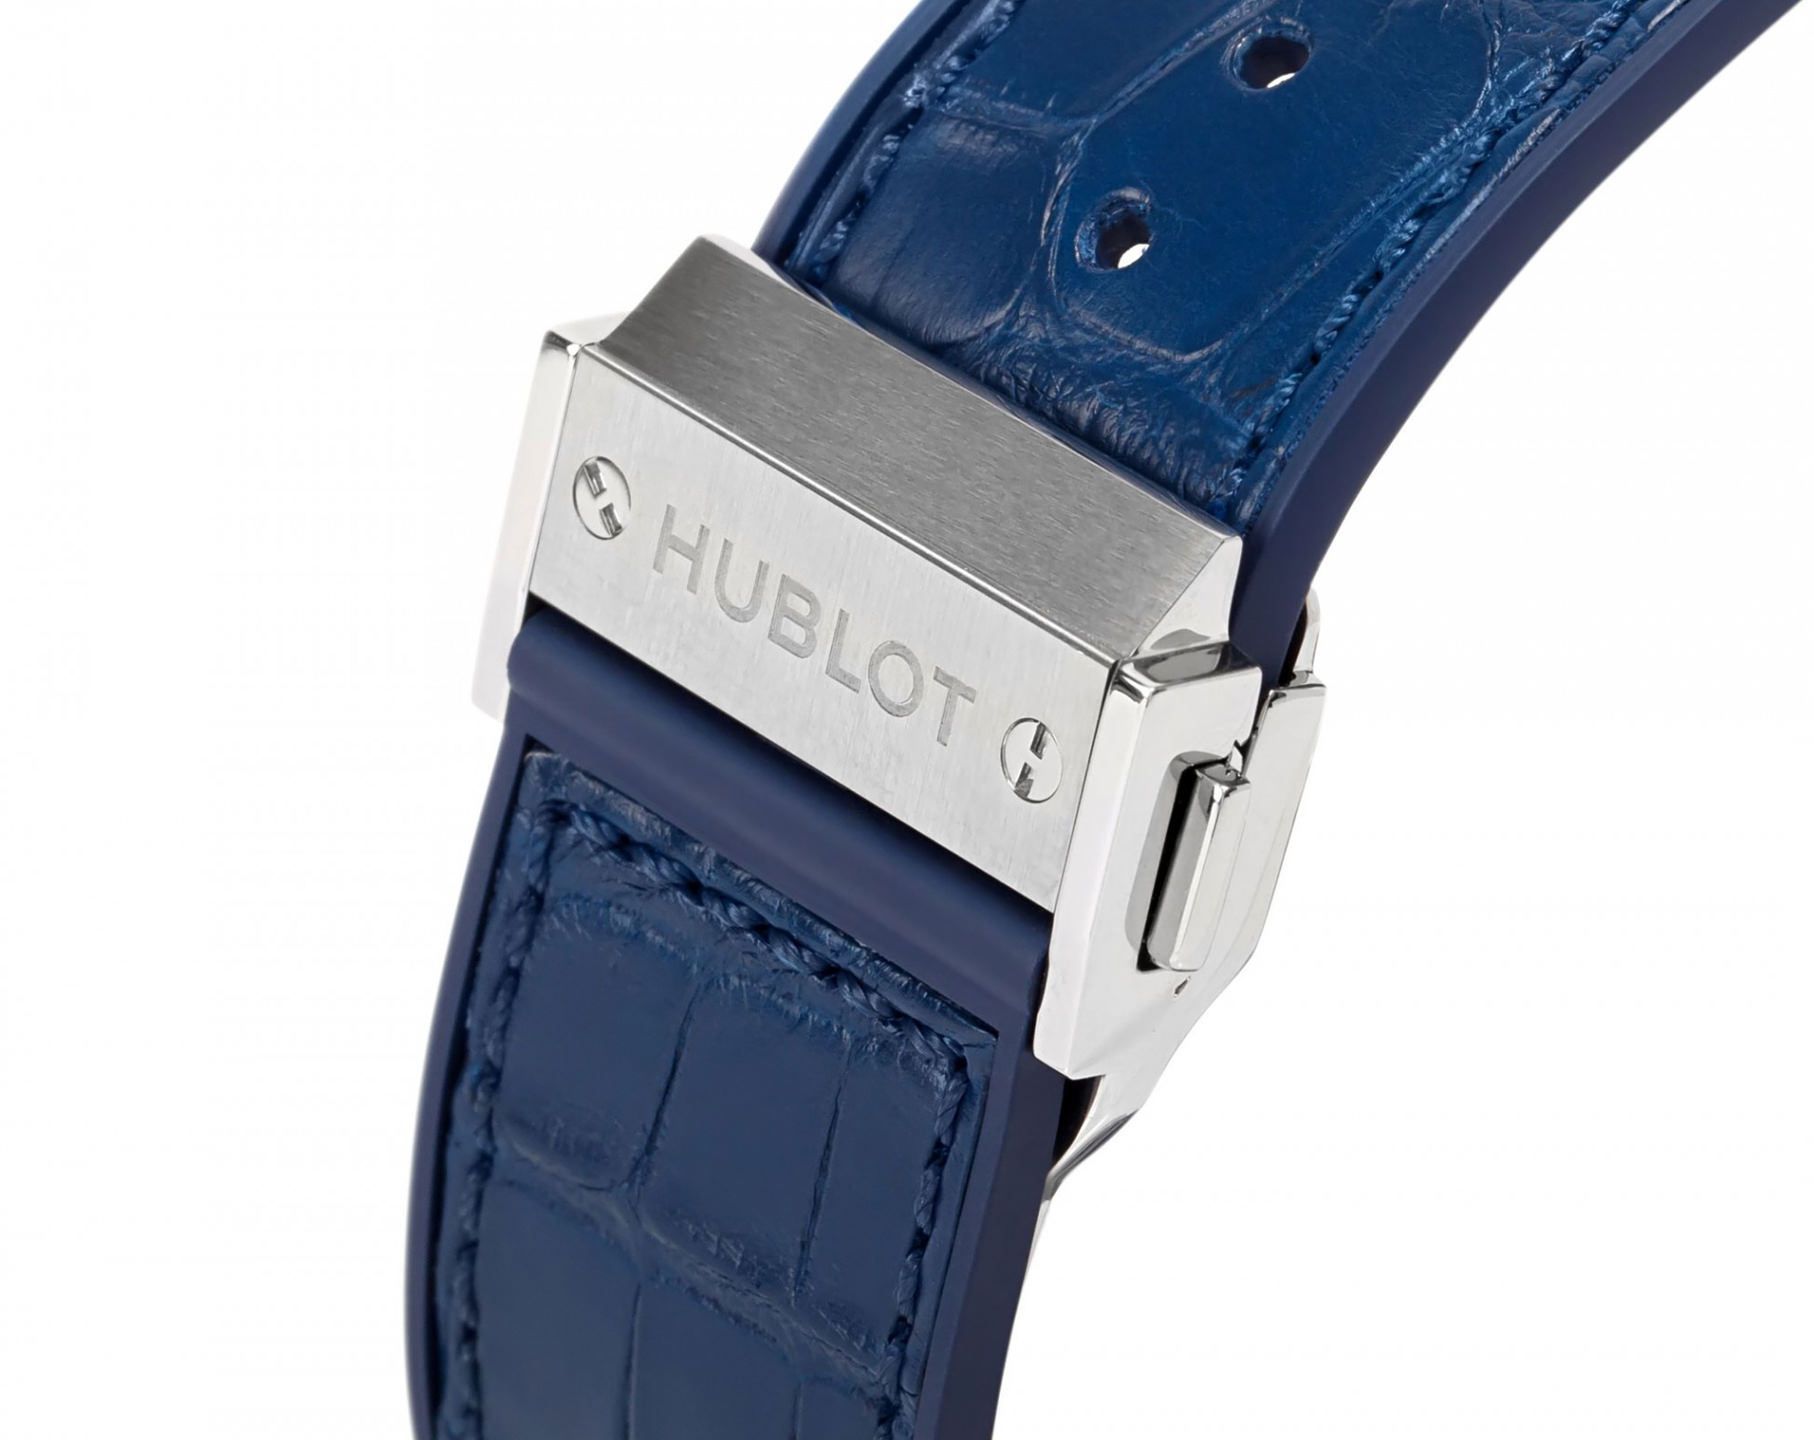 Hublot Chronograph 45 mm Watch in Blue Dial For Men - 3